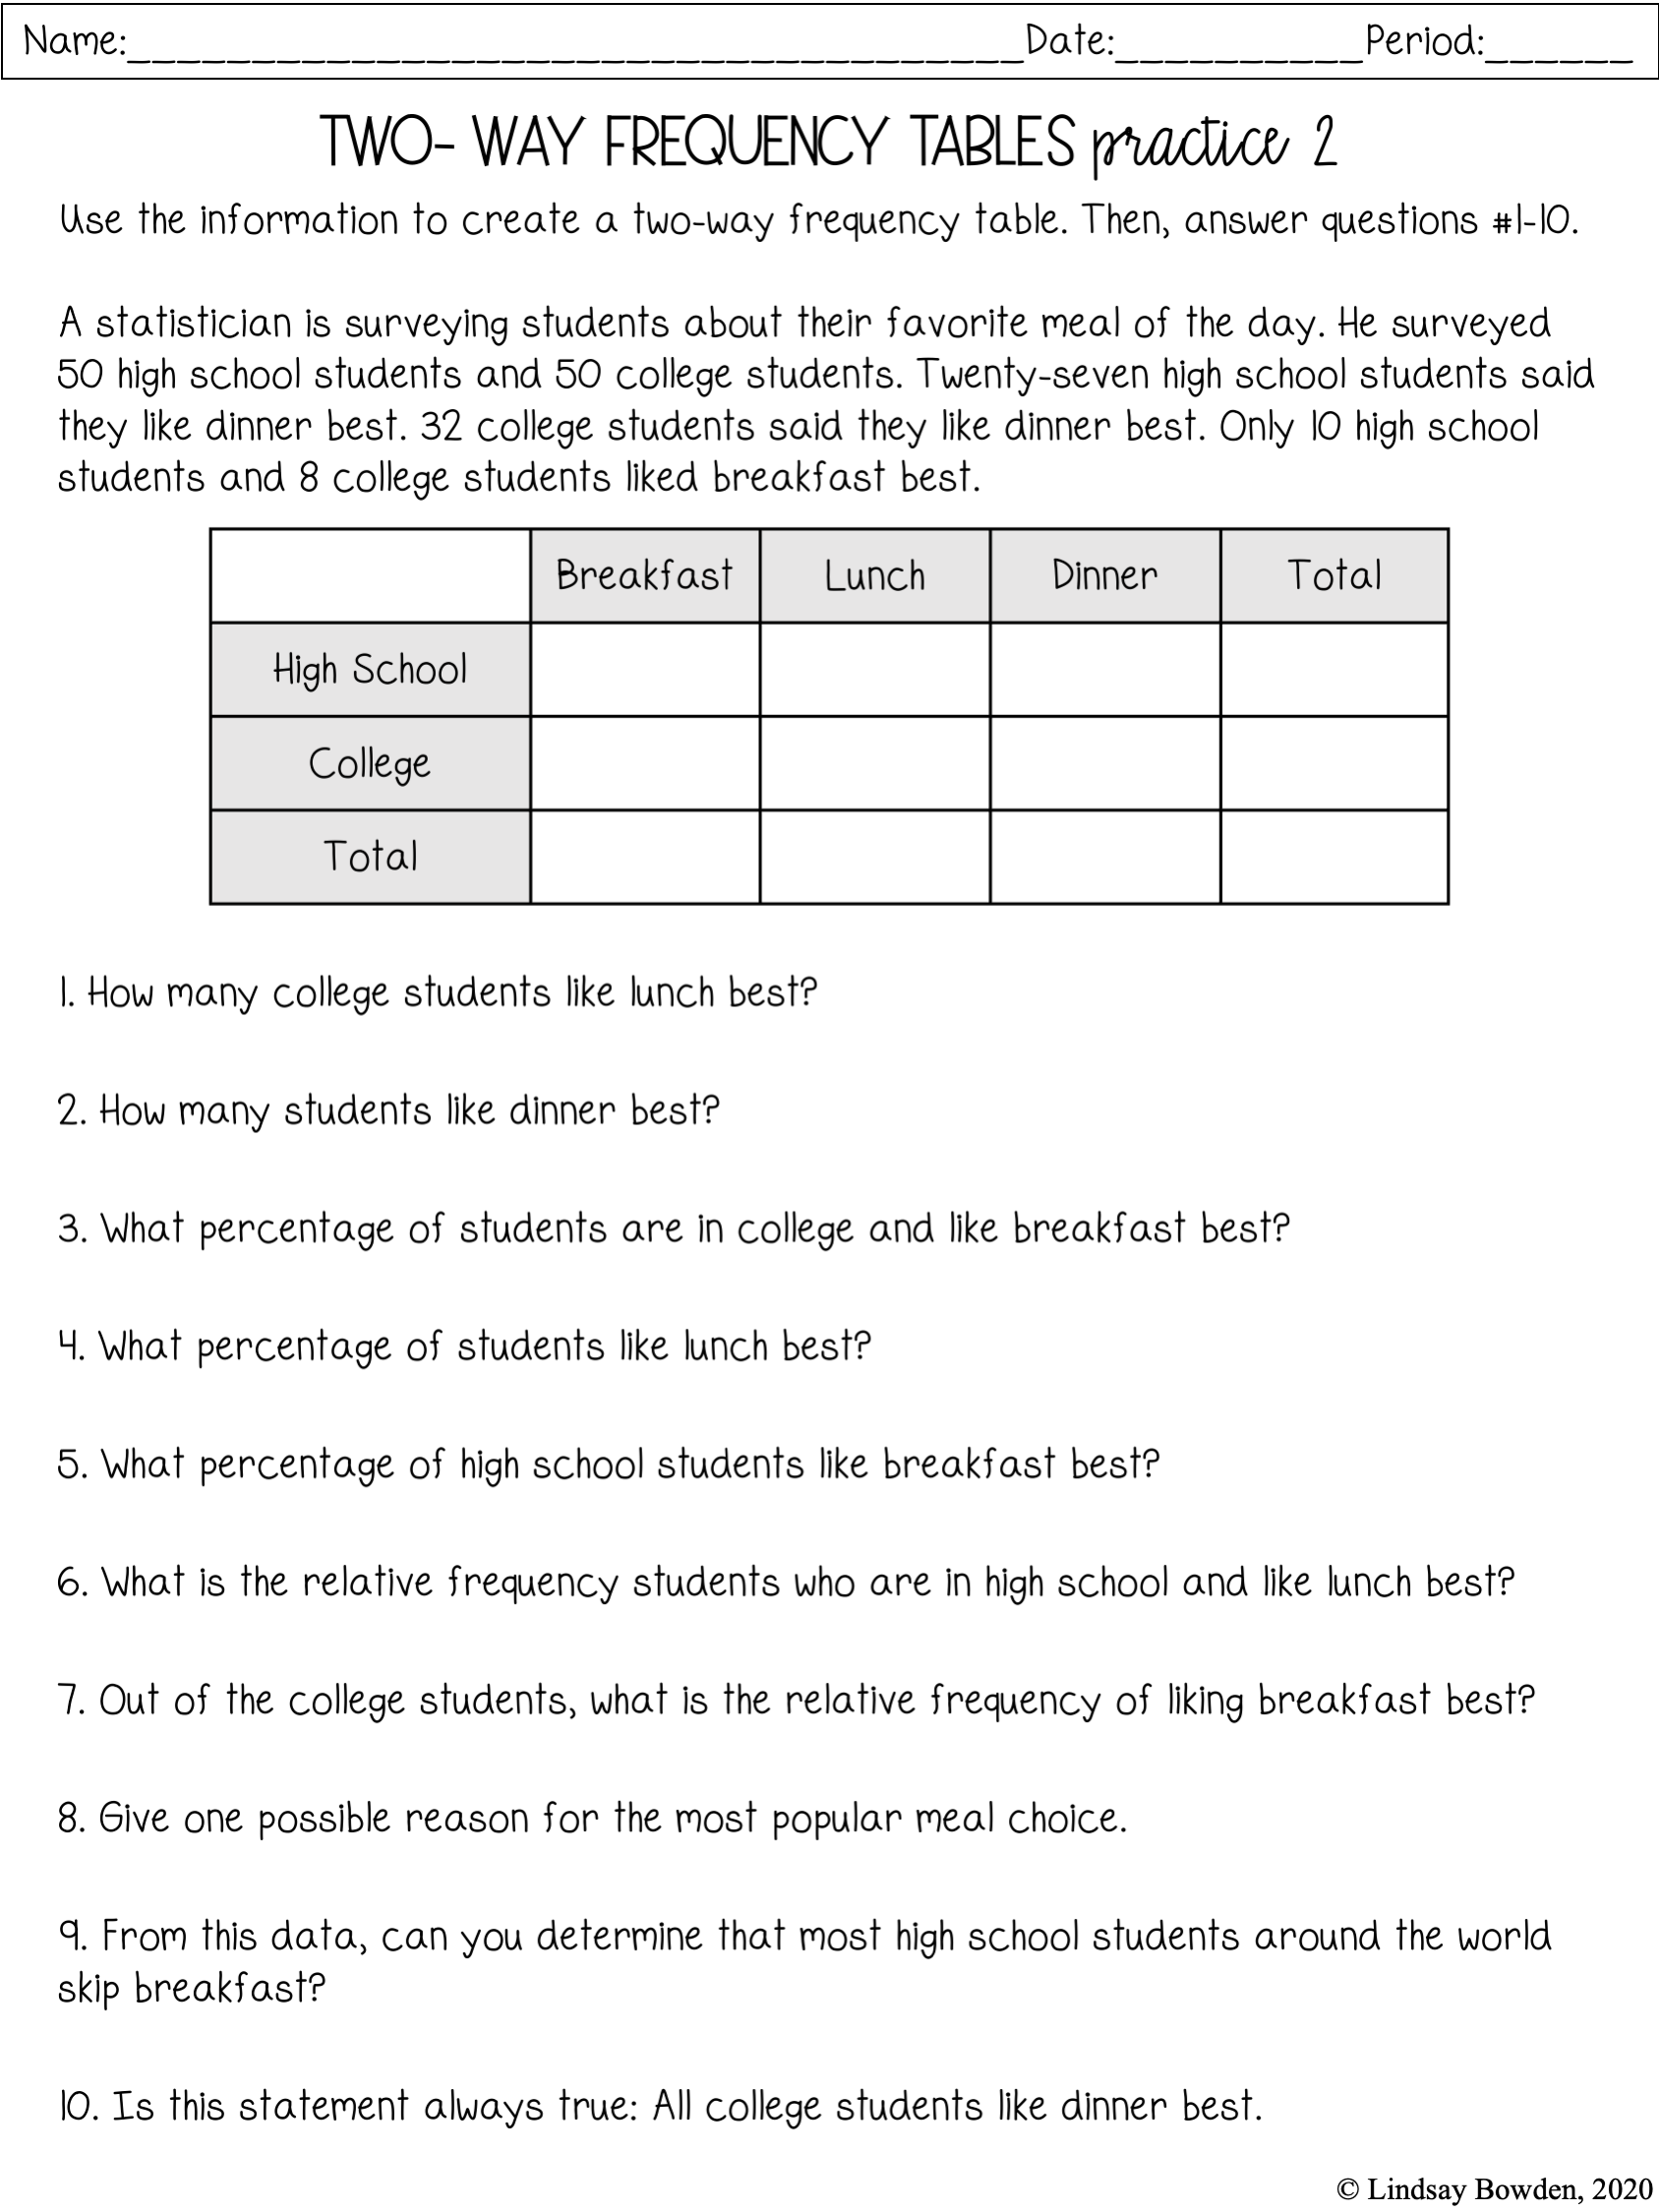 Two Way Frequency Tables Notes And Worksheets Lindsay Bowden